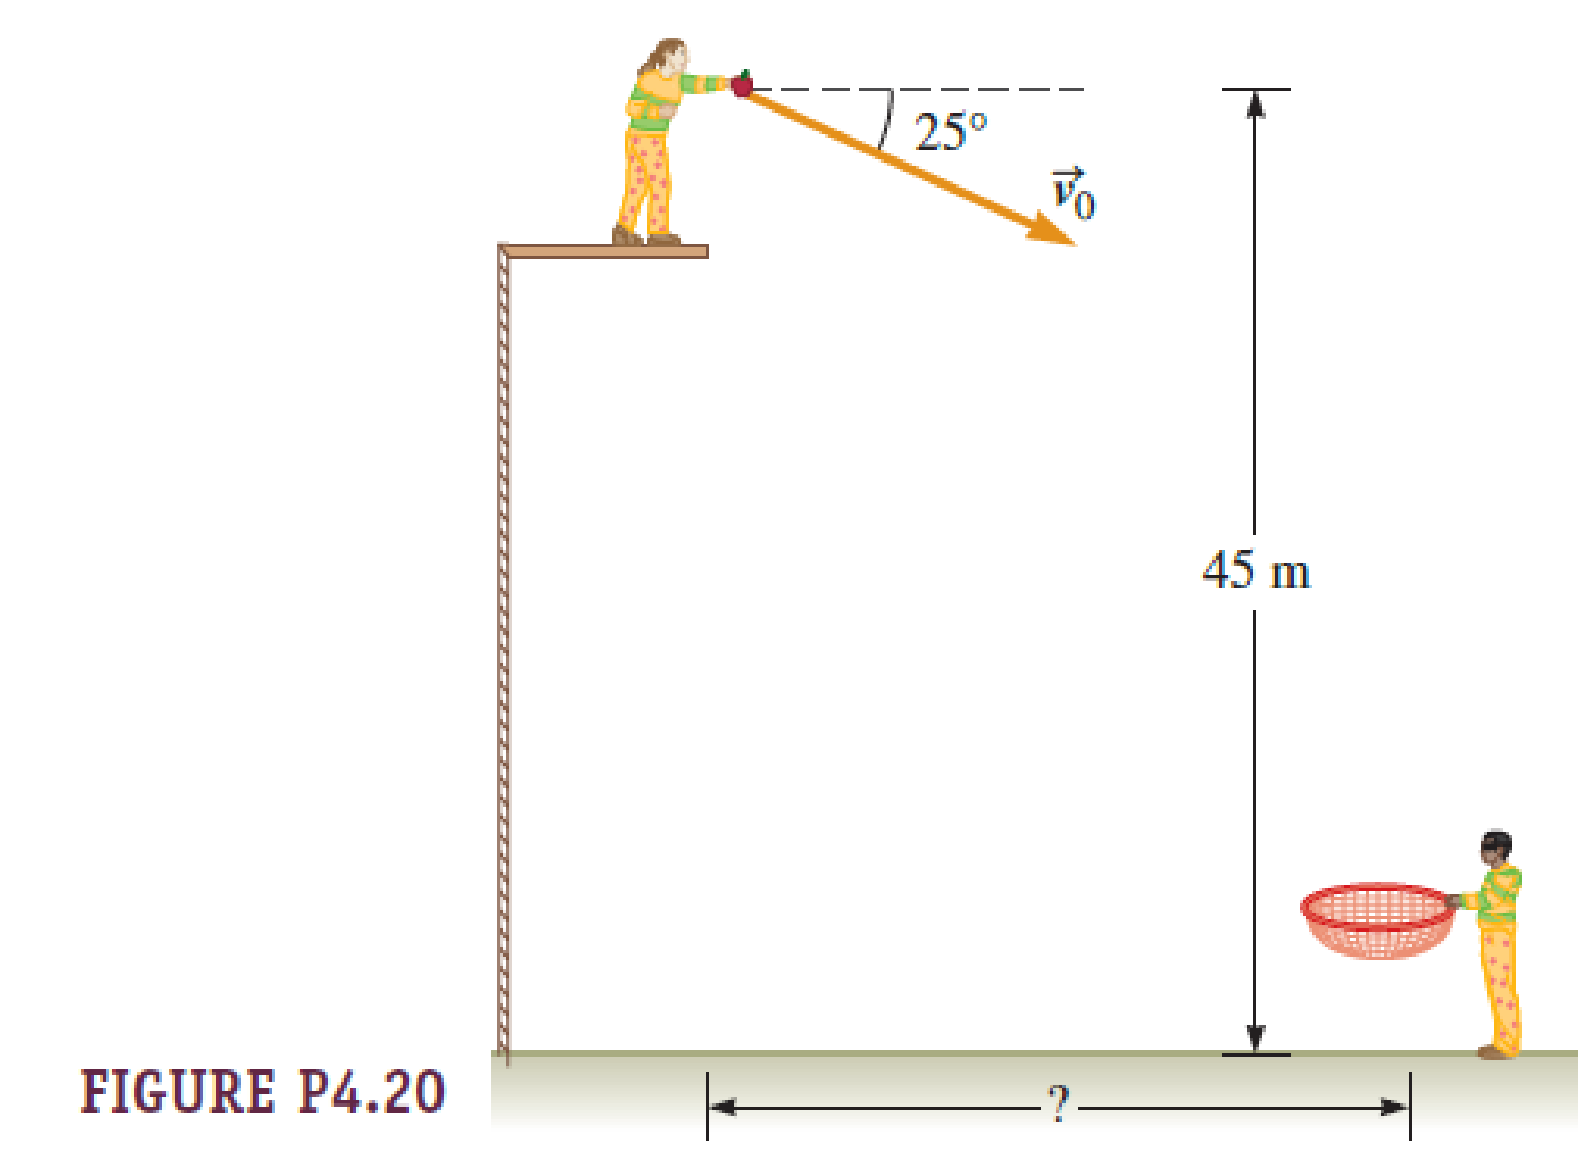 Chapter 4, Problem 20PQ, A circus performer stands on a platform and throws an apple from a height of 45 m above the ground 